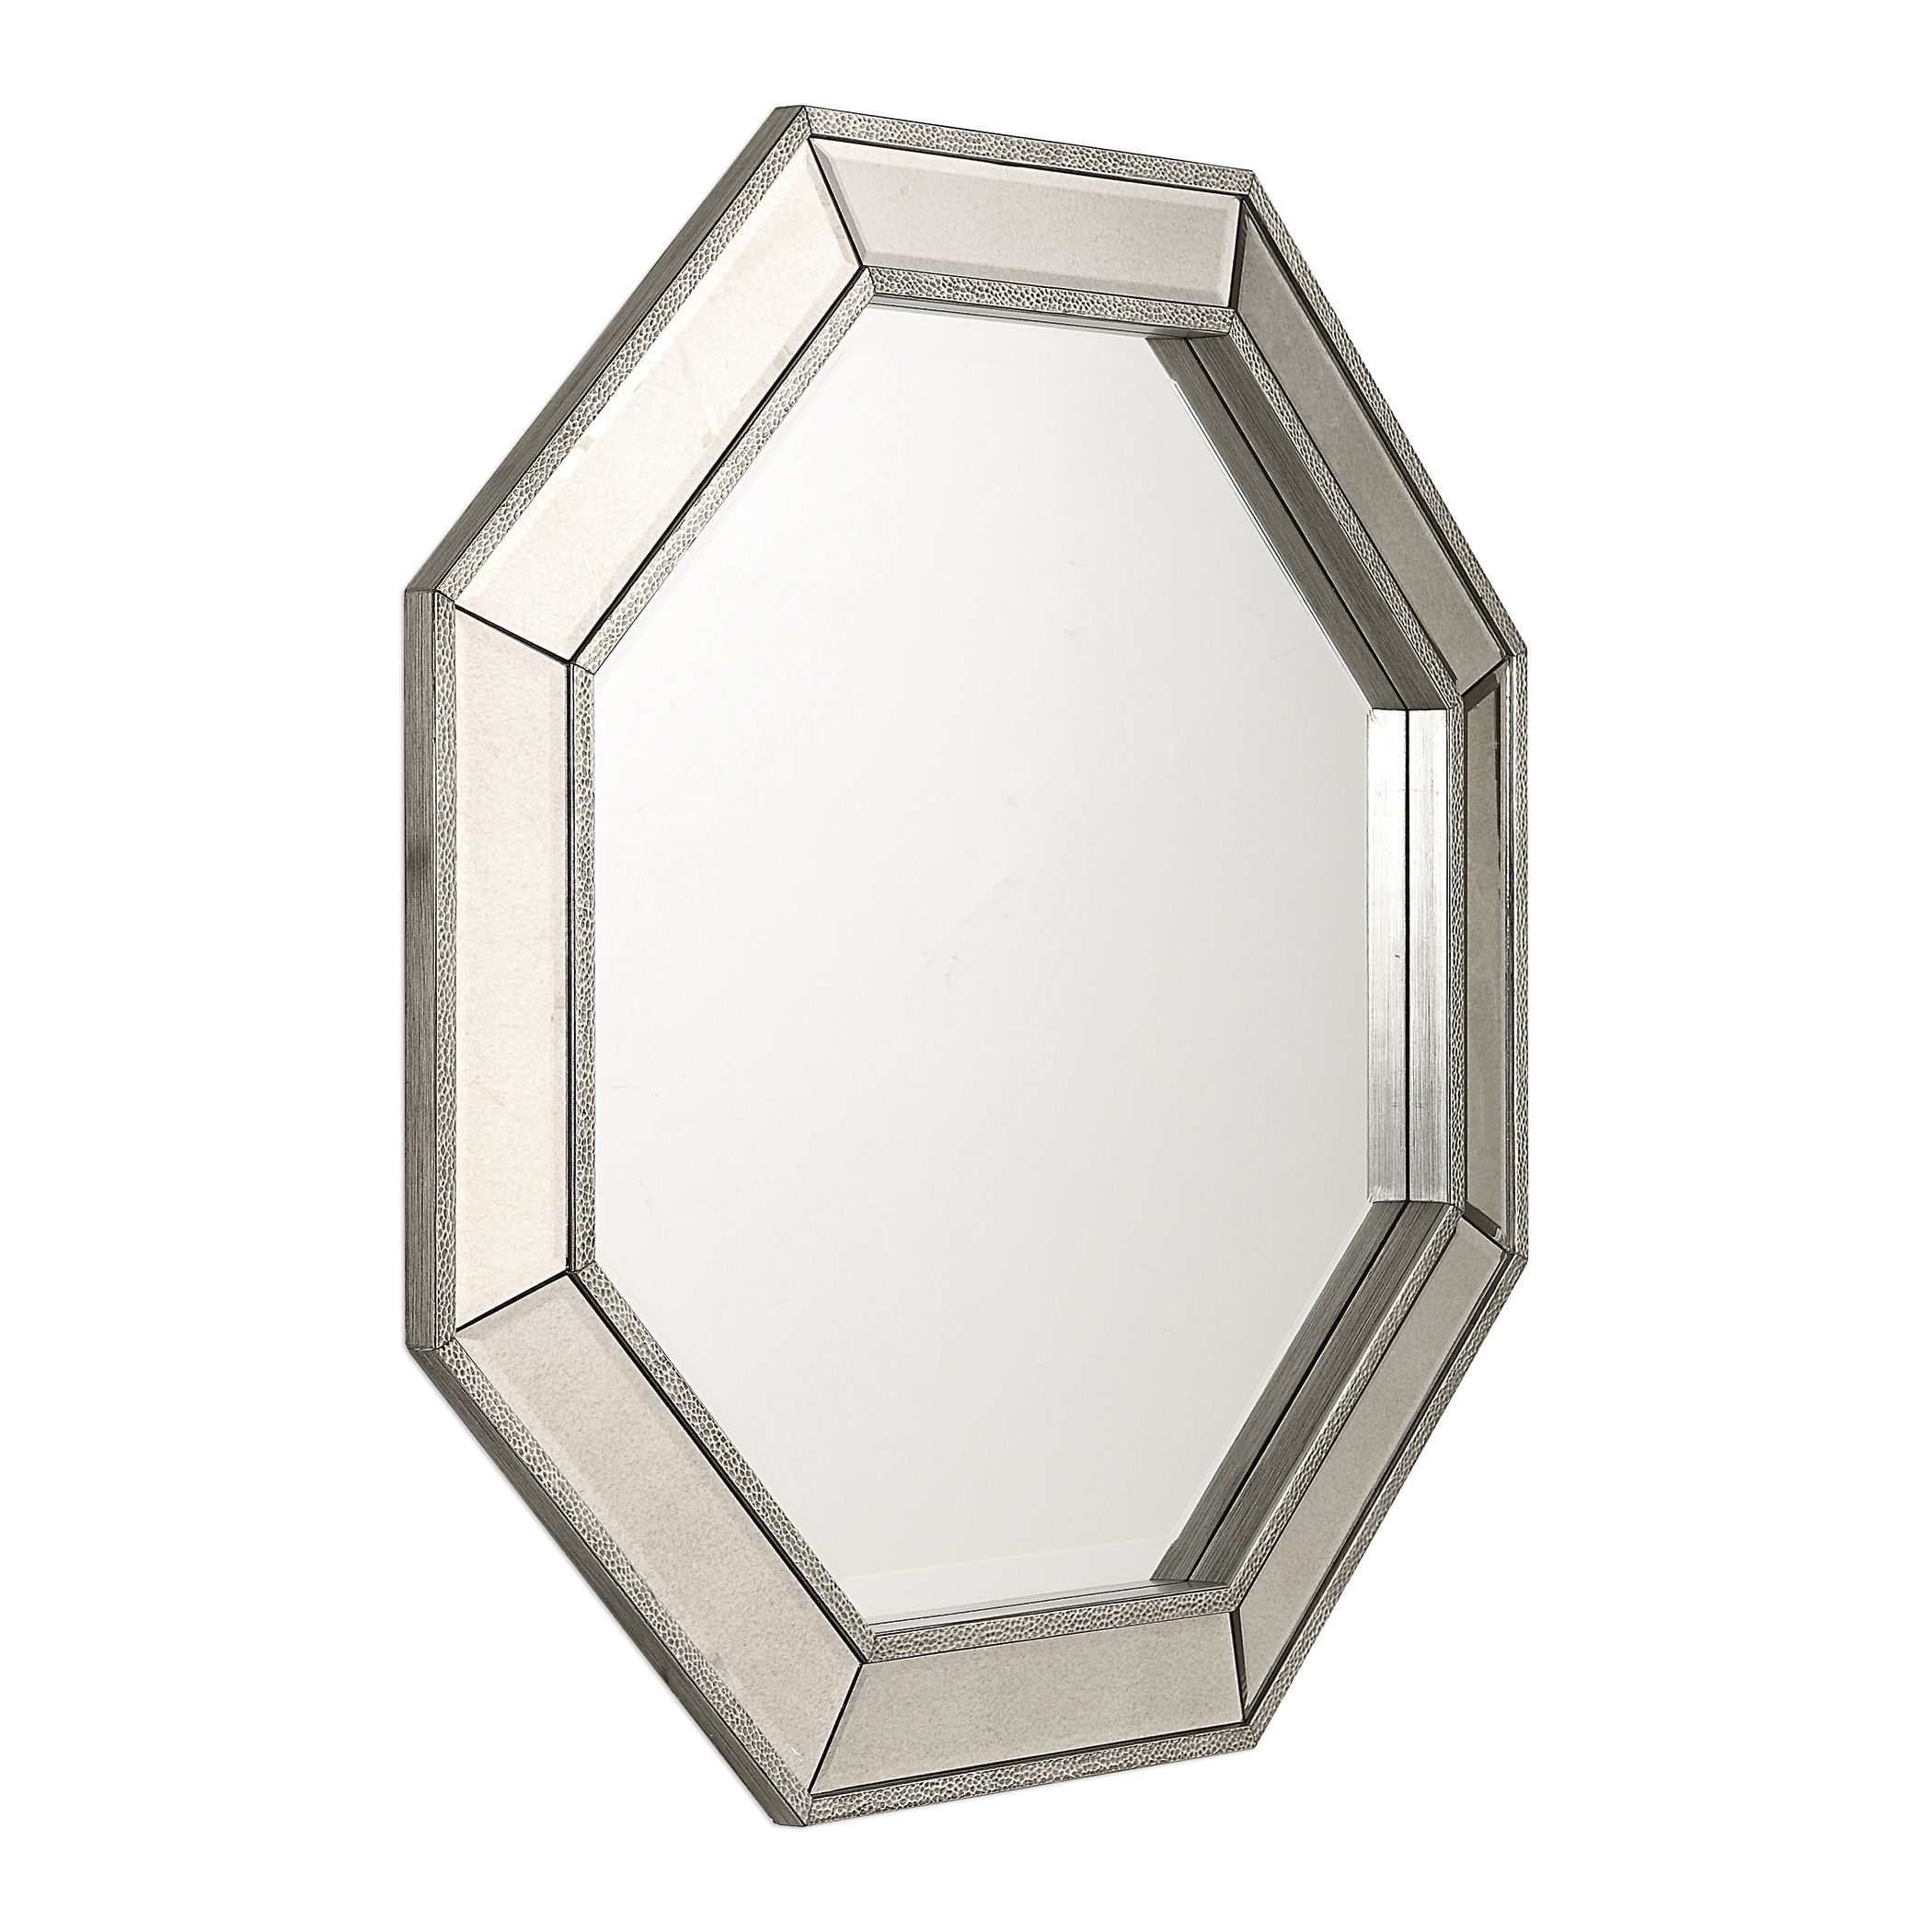 Glam Octagon Silver Mirror Framed Wall Mirror |38" Round Venetian In Octagon Wall Mirrors (View 7 of 15)